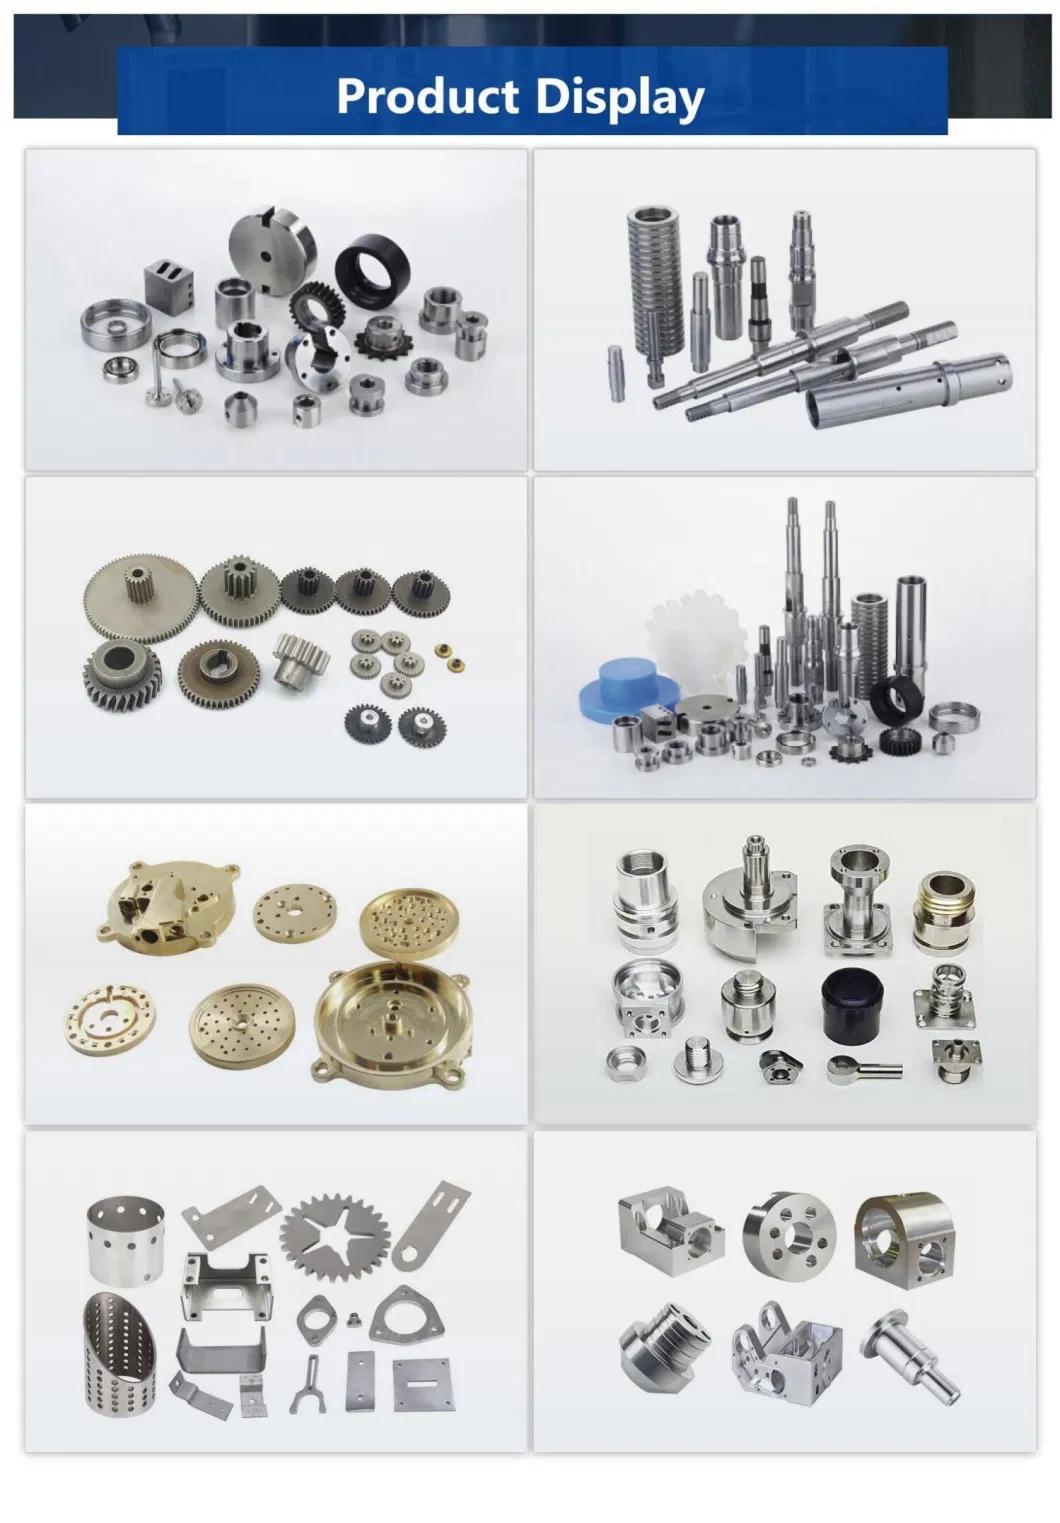 China OEM Manufacturer High Precision CNC Machining Milling Metal Stainless Steel Aluminum Alloy Machine Equipment Industrial Components